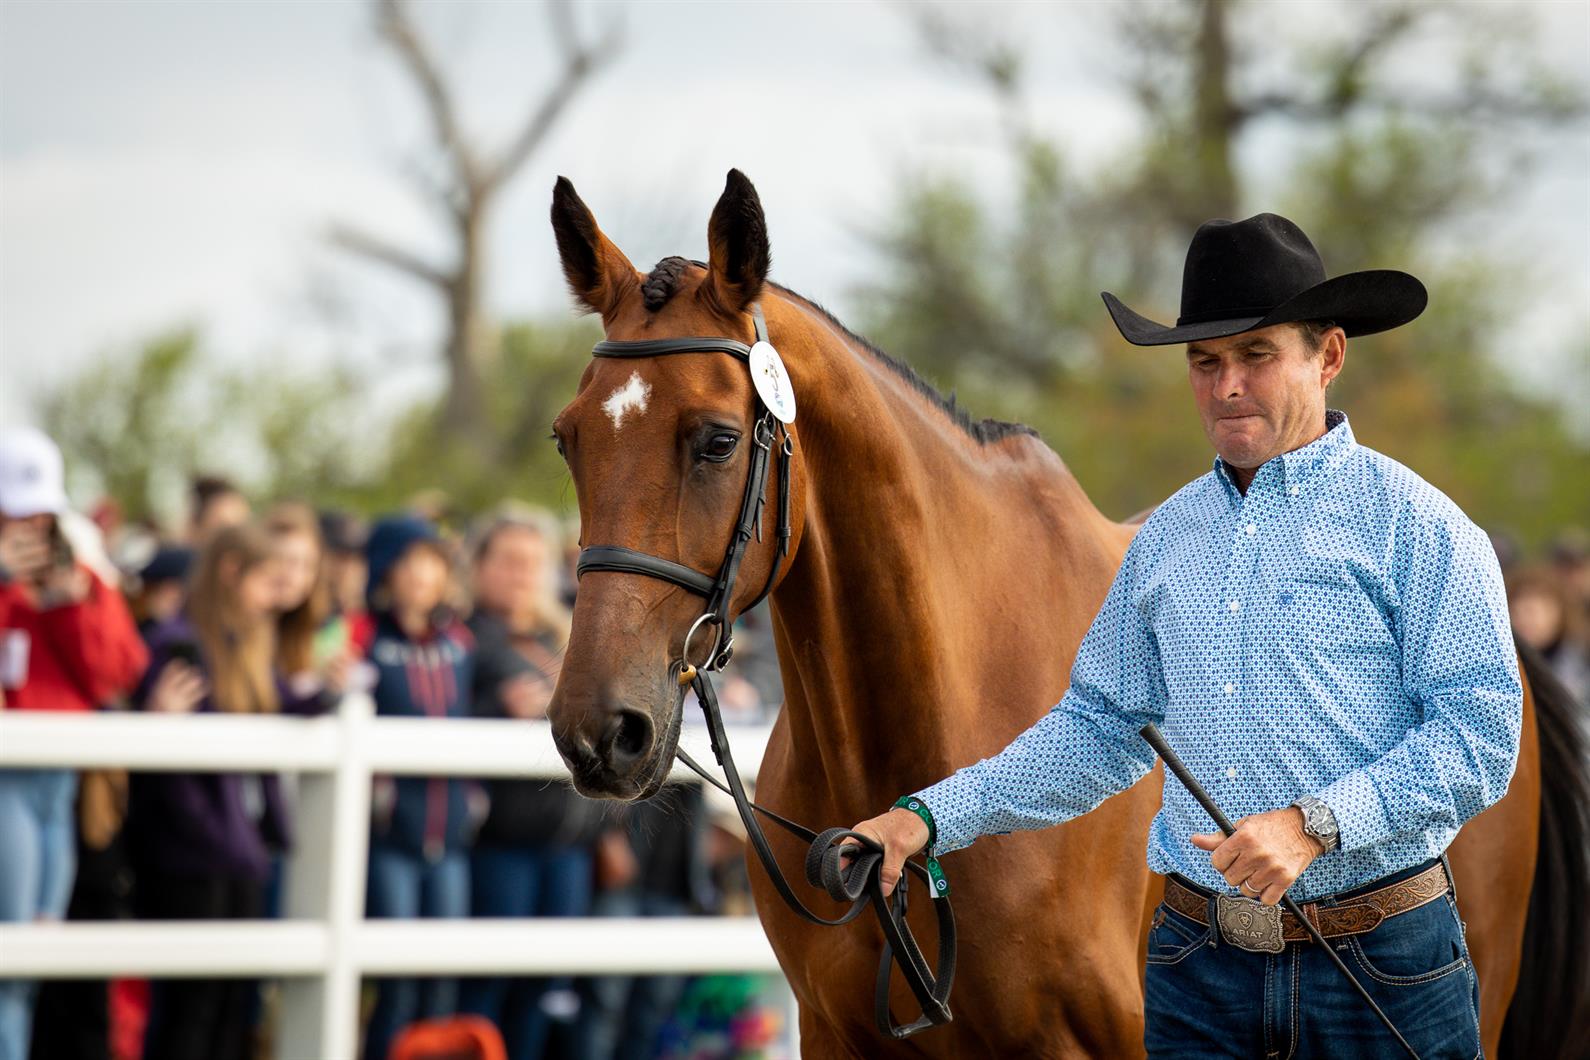 Phillip Dutton and Z in the LRK3DE second horse inspection. Phillip is wearing Ariat western wear, including a cowboy hat.